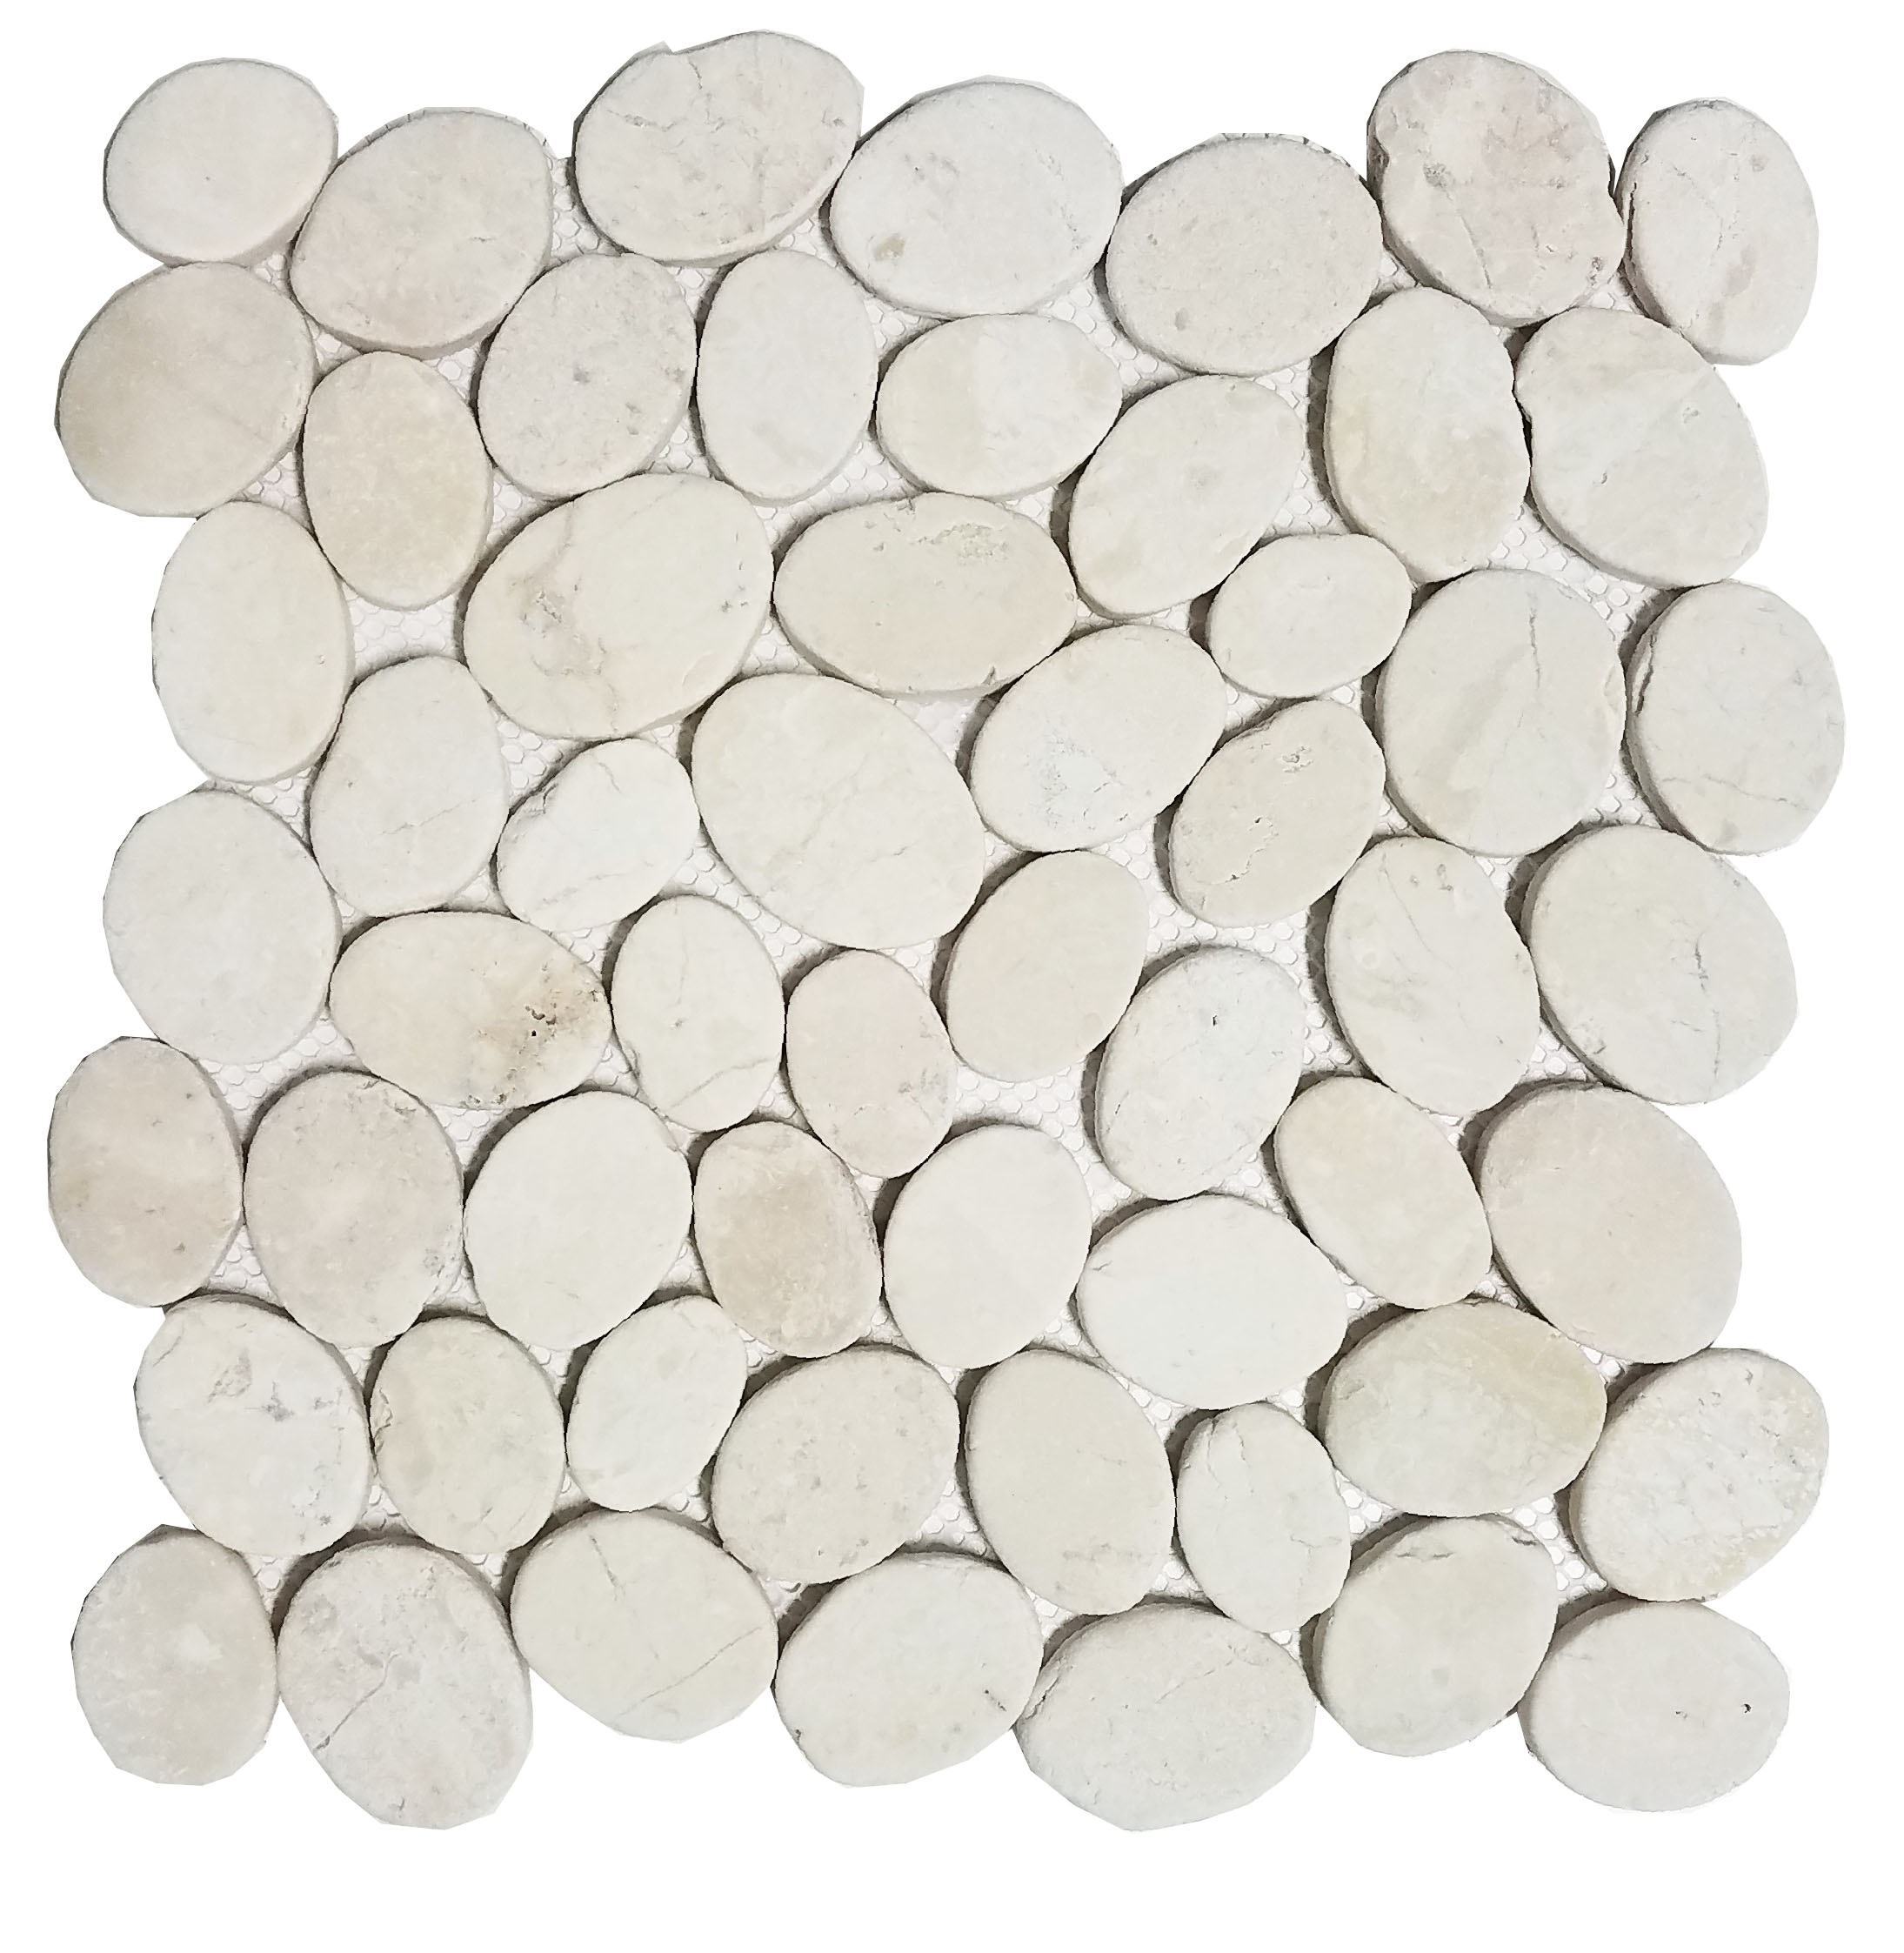 COIN MARBLE TILE OFF-WHITE TUMBLED STONE PEBBLES